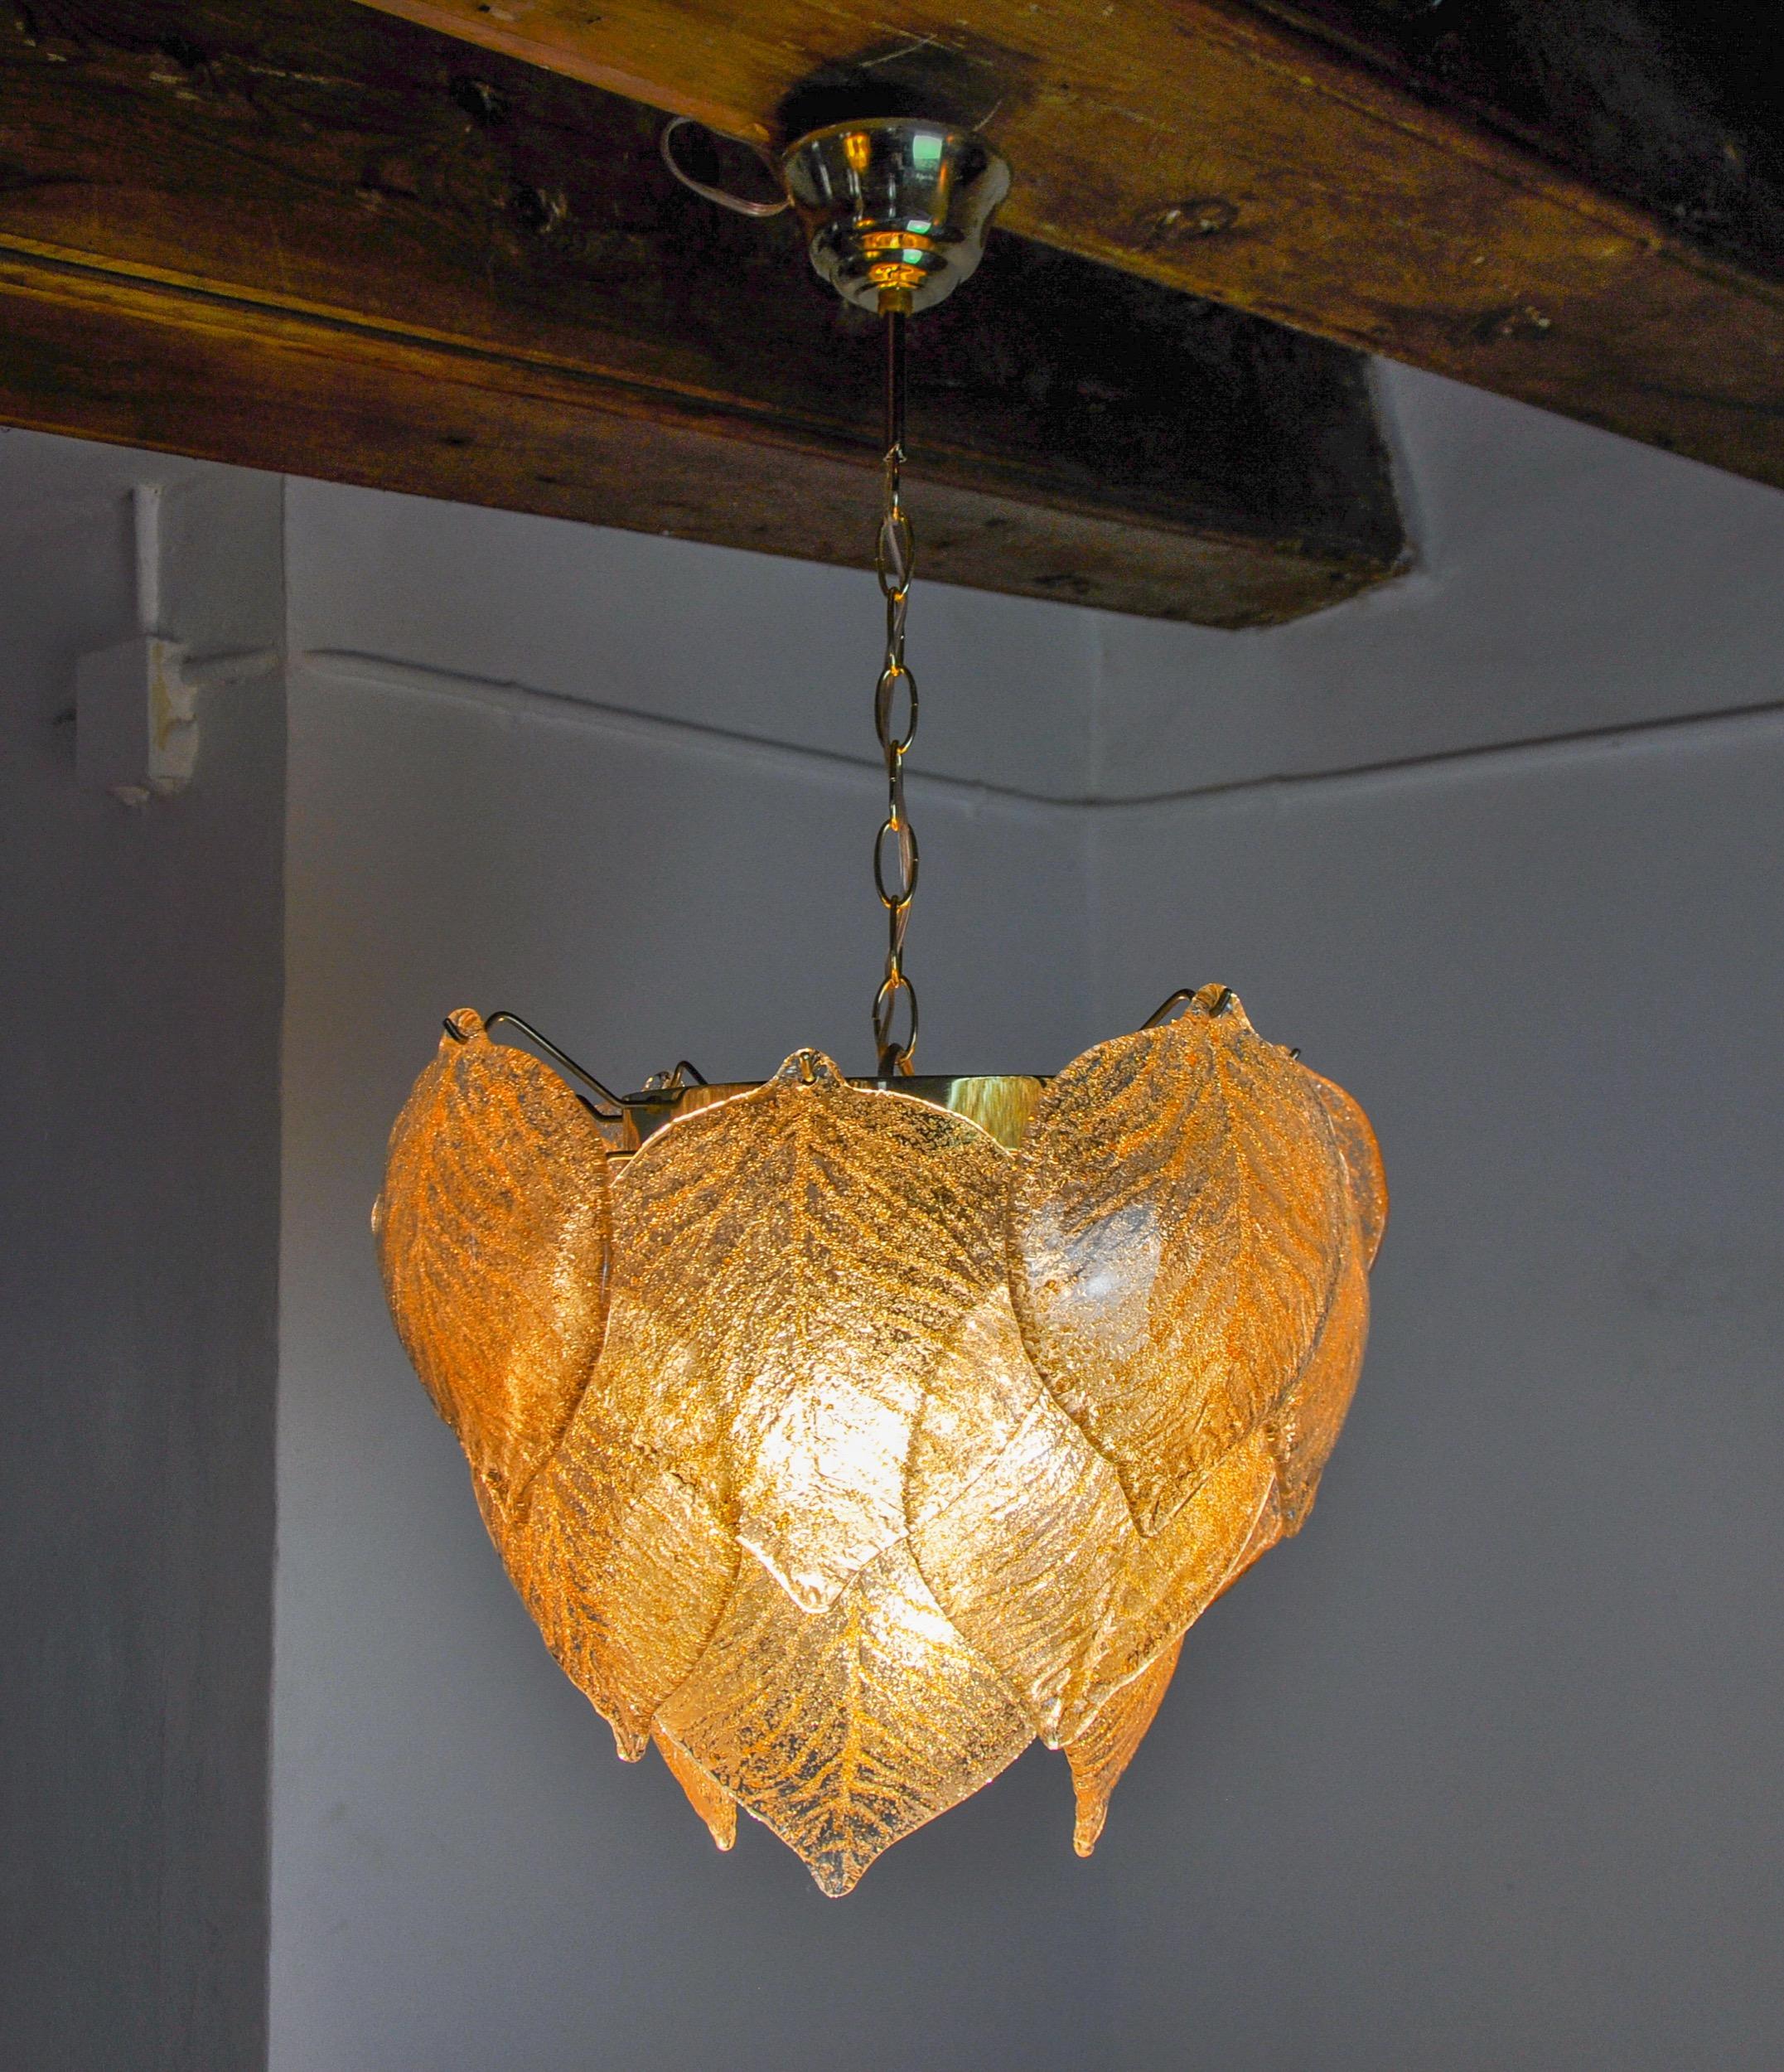 Superb and rare Mazzega Murano chandelier produced in Italy in the 70s. Frosted Murano glass crystals, in the shape of leaves distributed on a golden metal structure. Unique object that will illuminate wonderfully and bring a real designer touch to